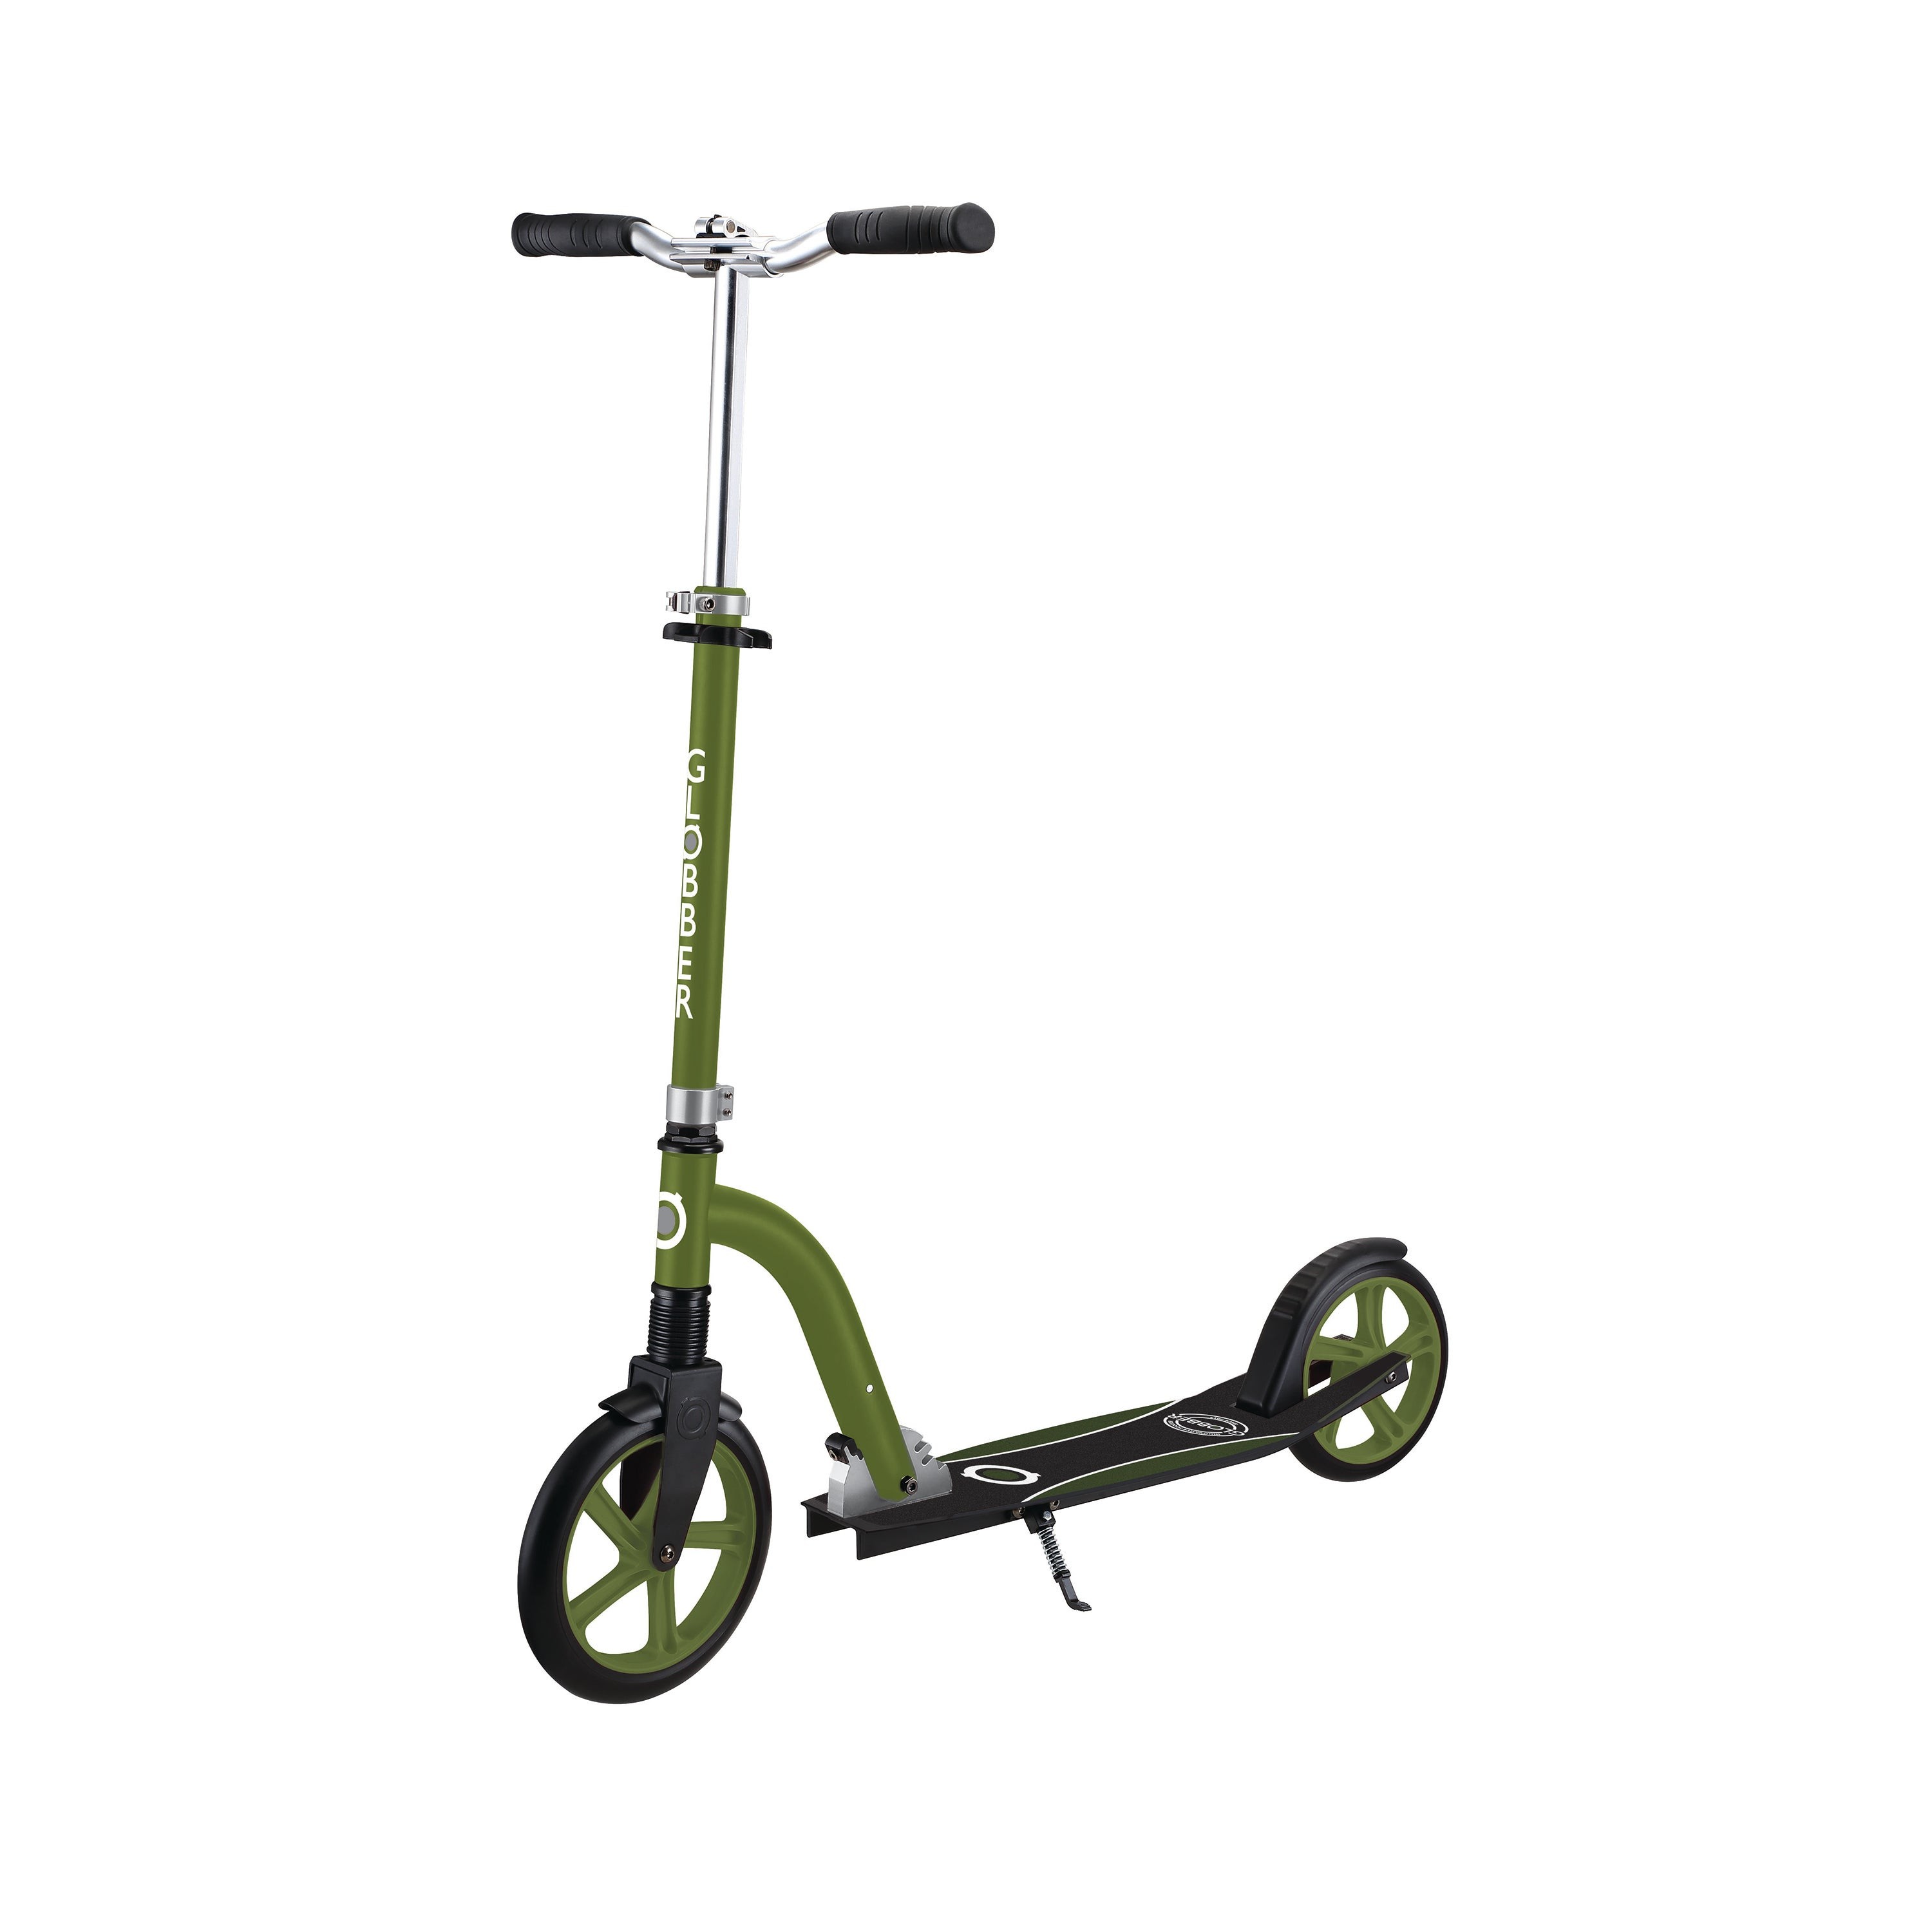 NL 230-205 Duo Big Wheel Folding Scooter - Ages 14+ Years Khaki Green